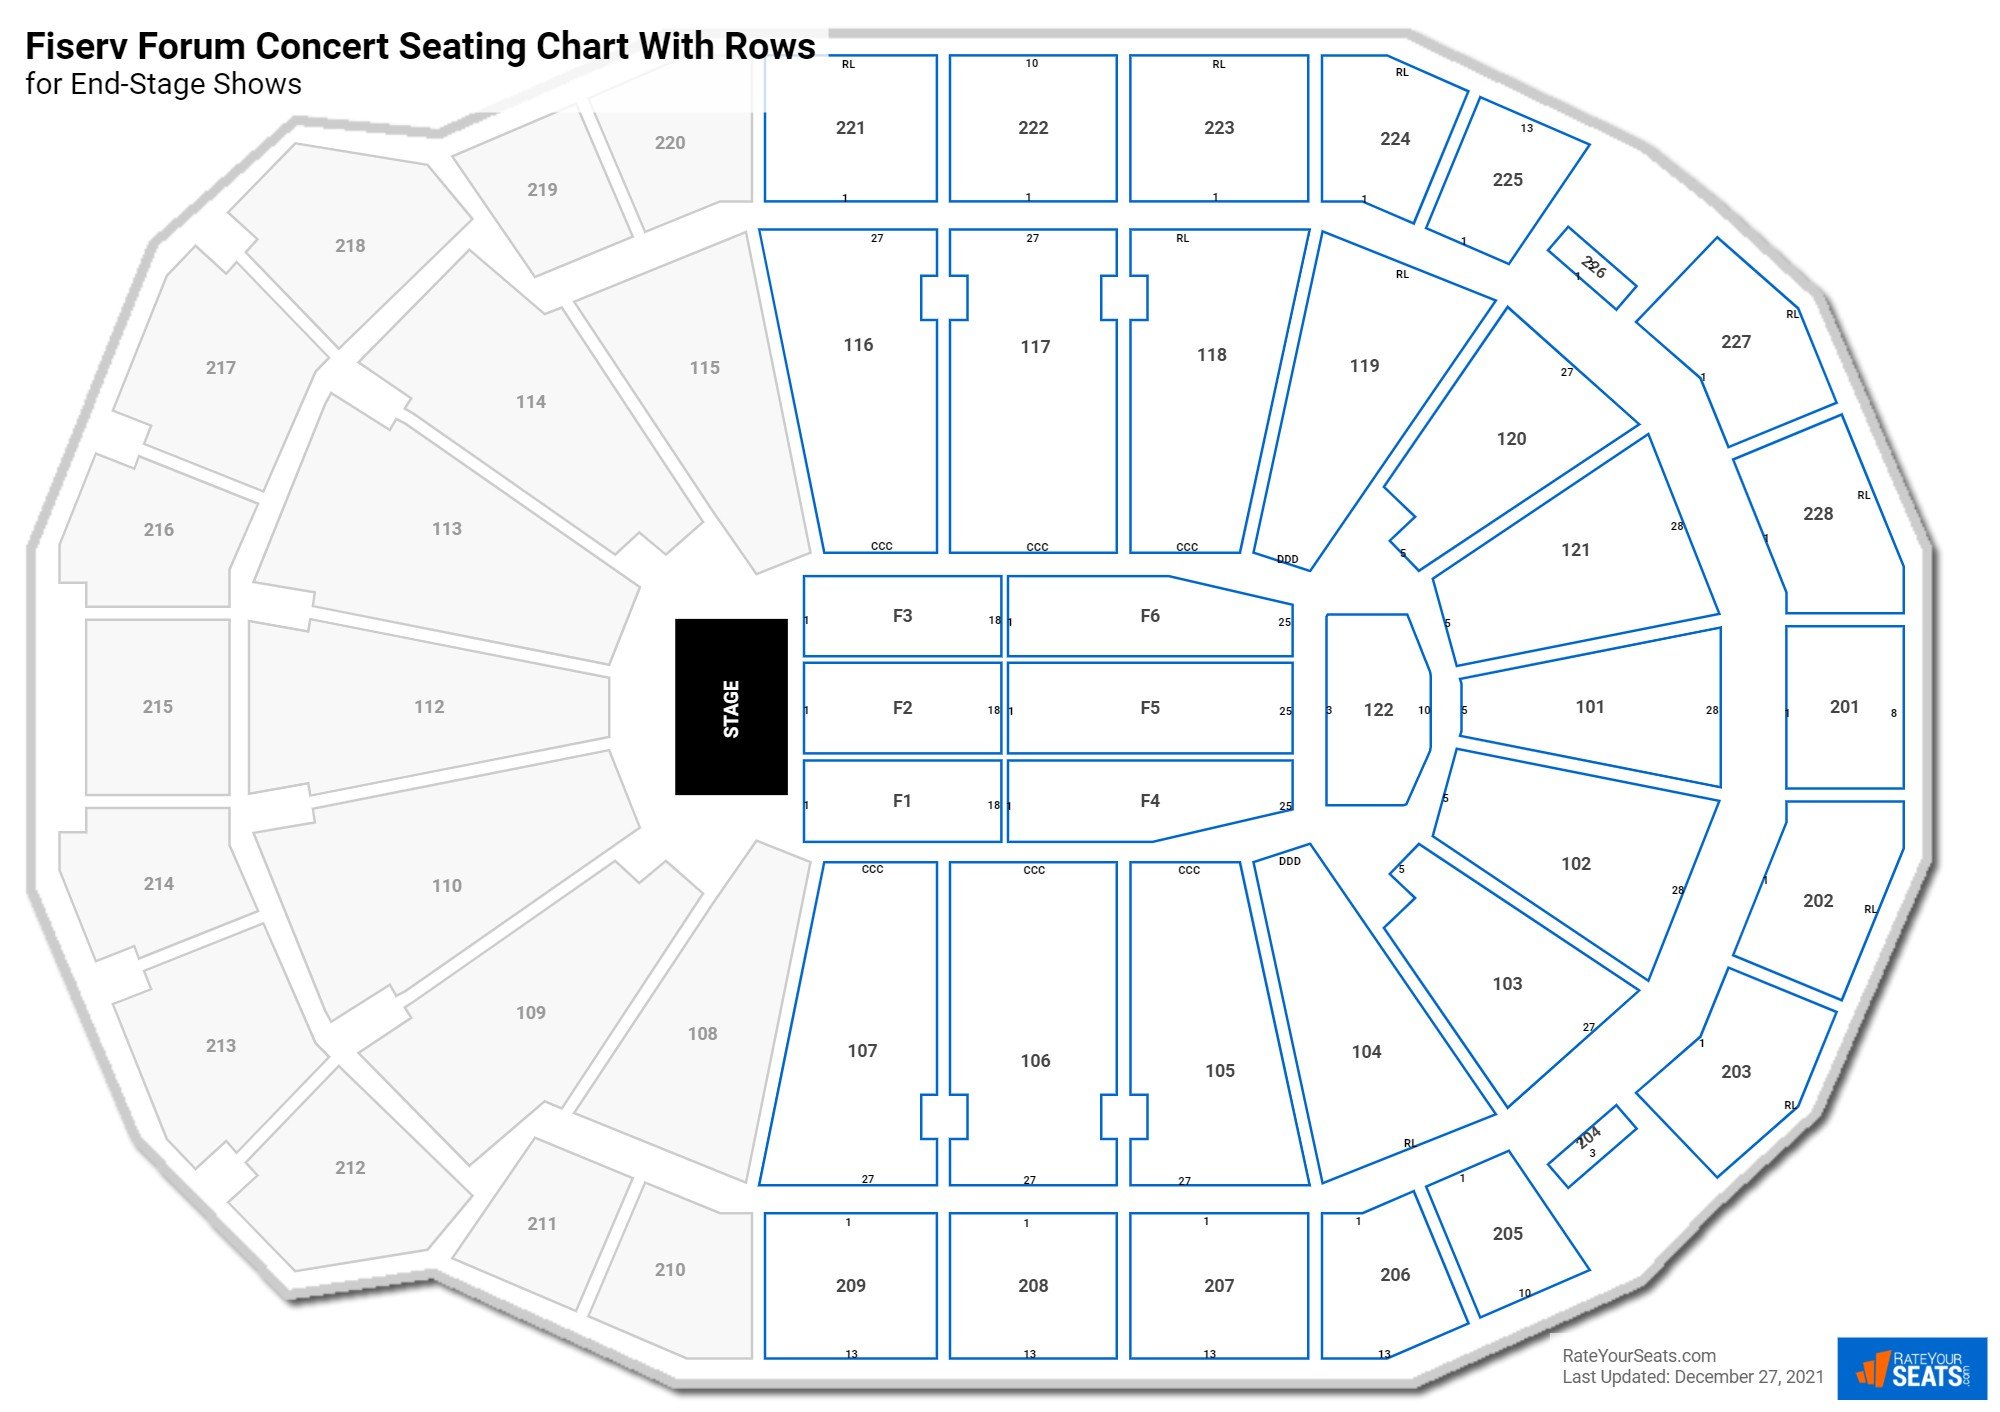 Fiserv Forum seating chart with row numbers